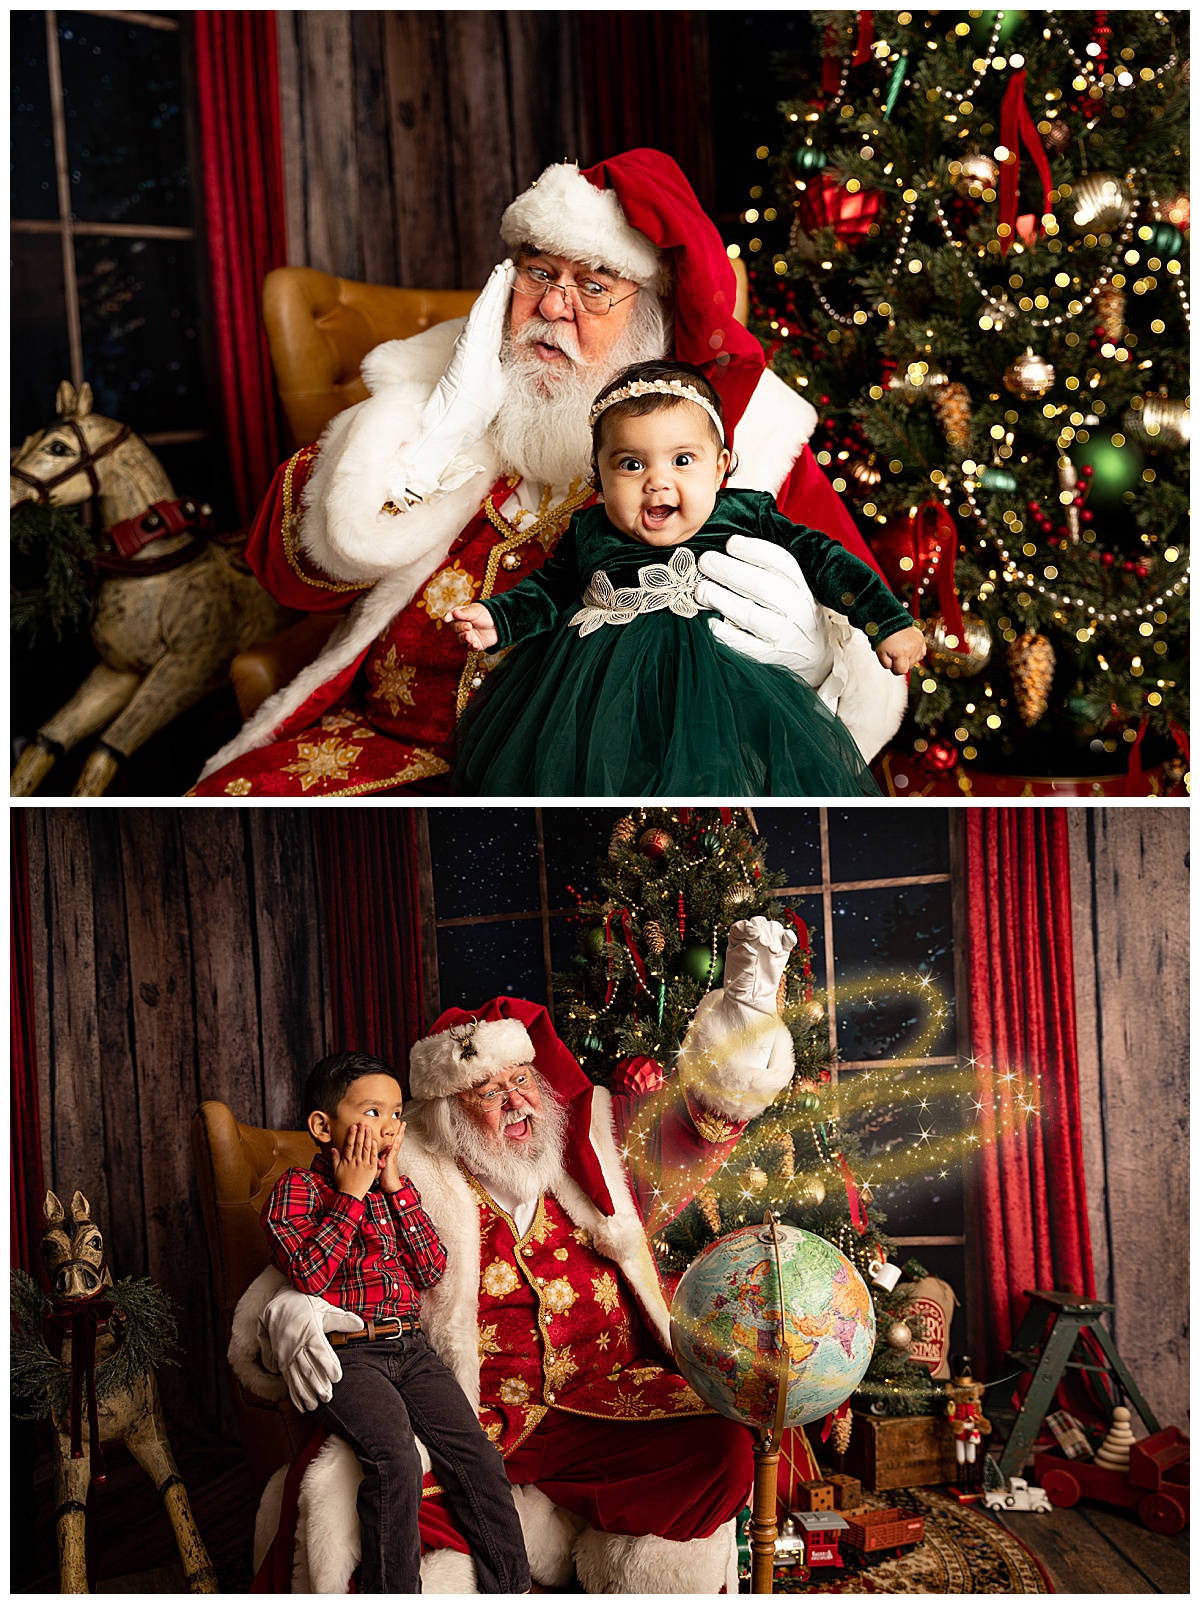 Two young kids are Meeting Santa